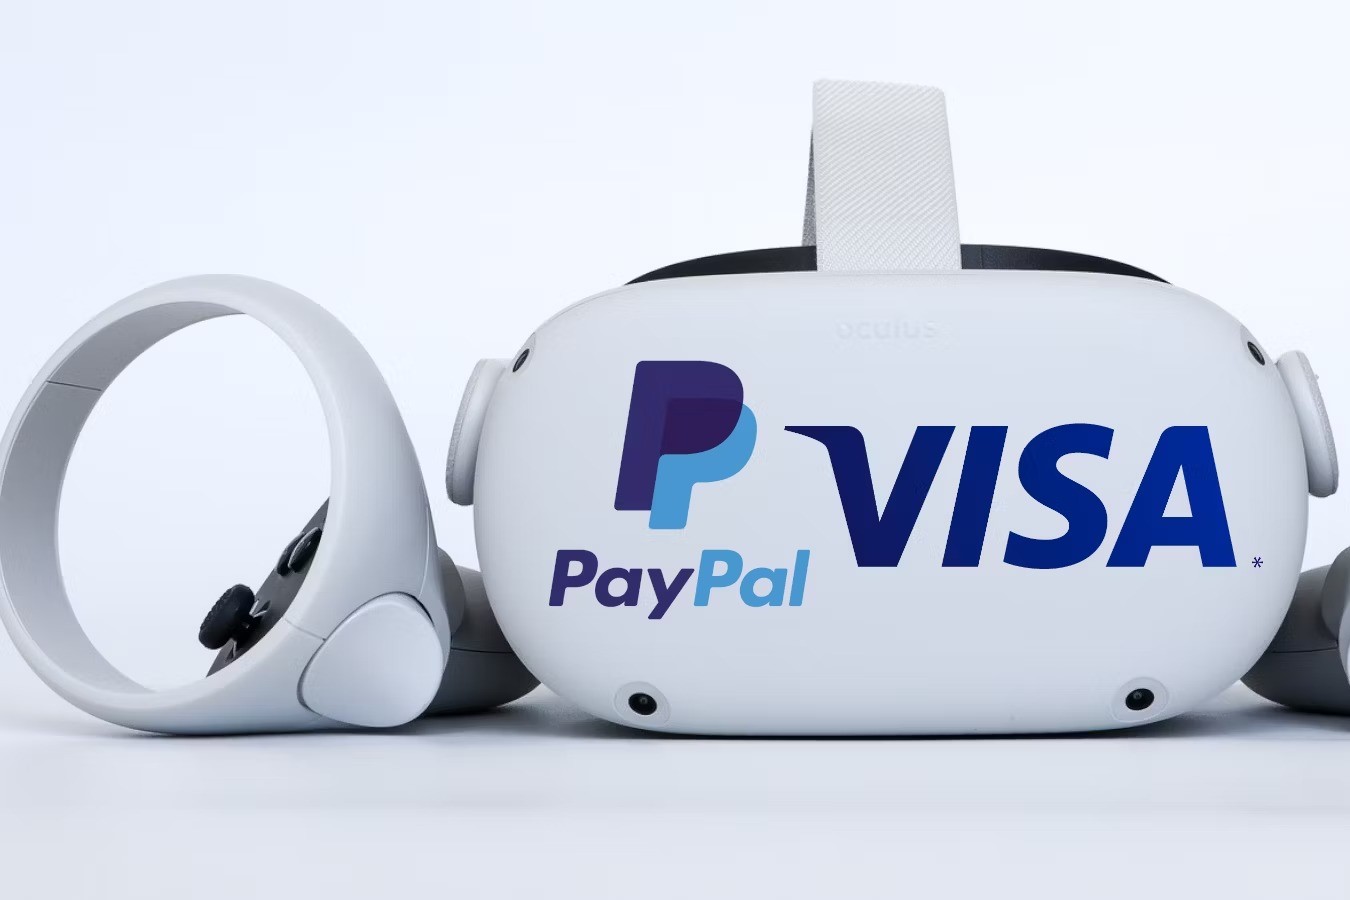 How To Get The Oculus Rift On Easy Payments With Paypal